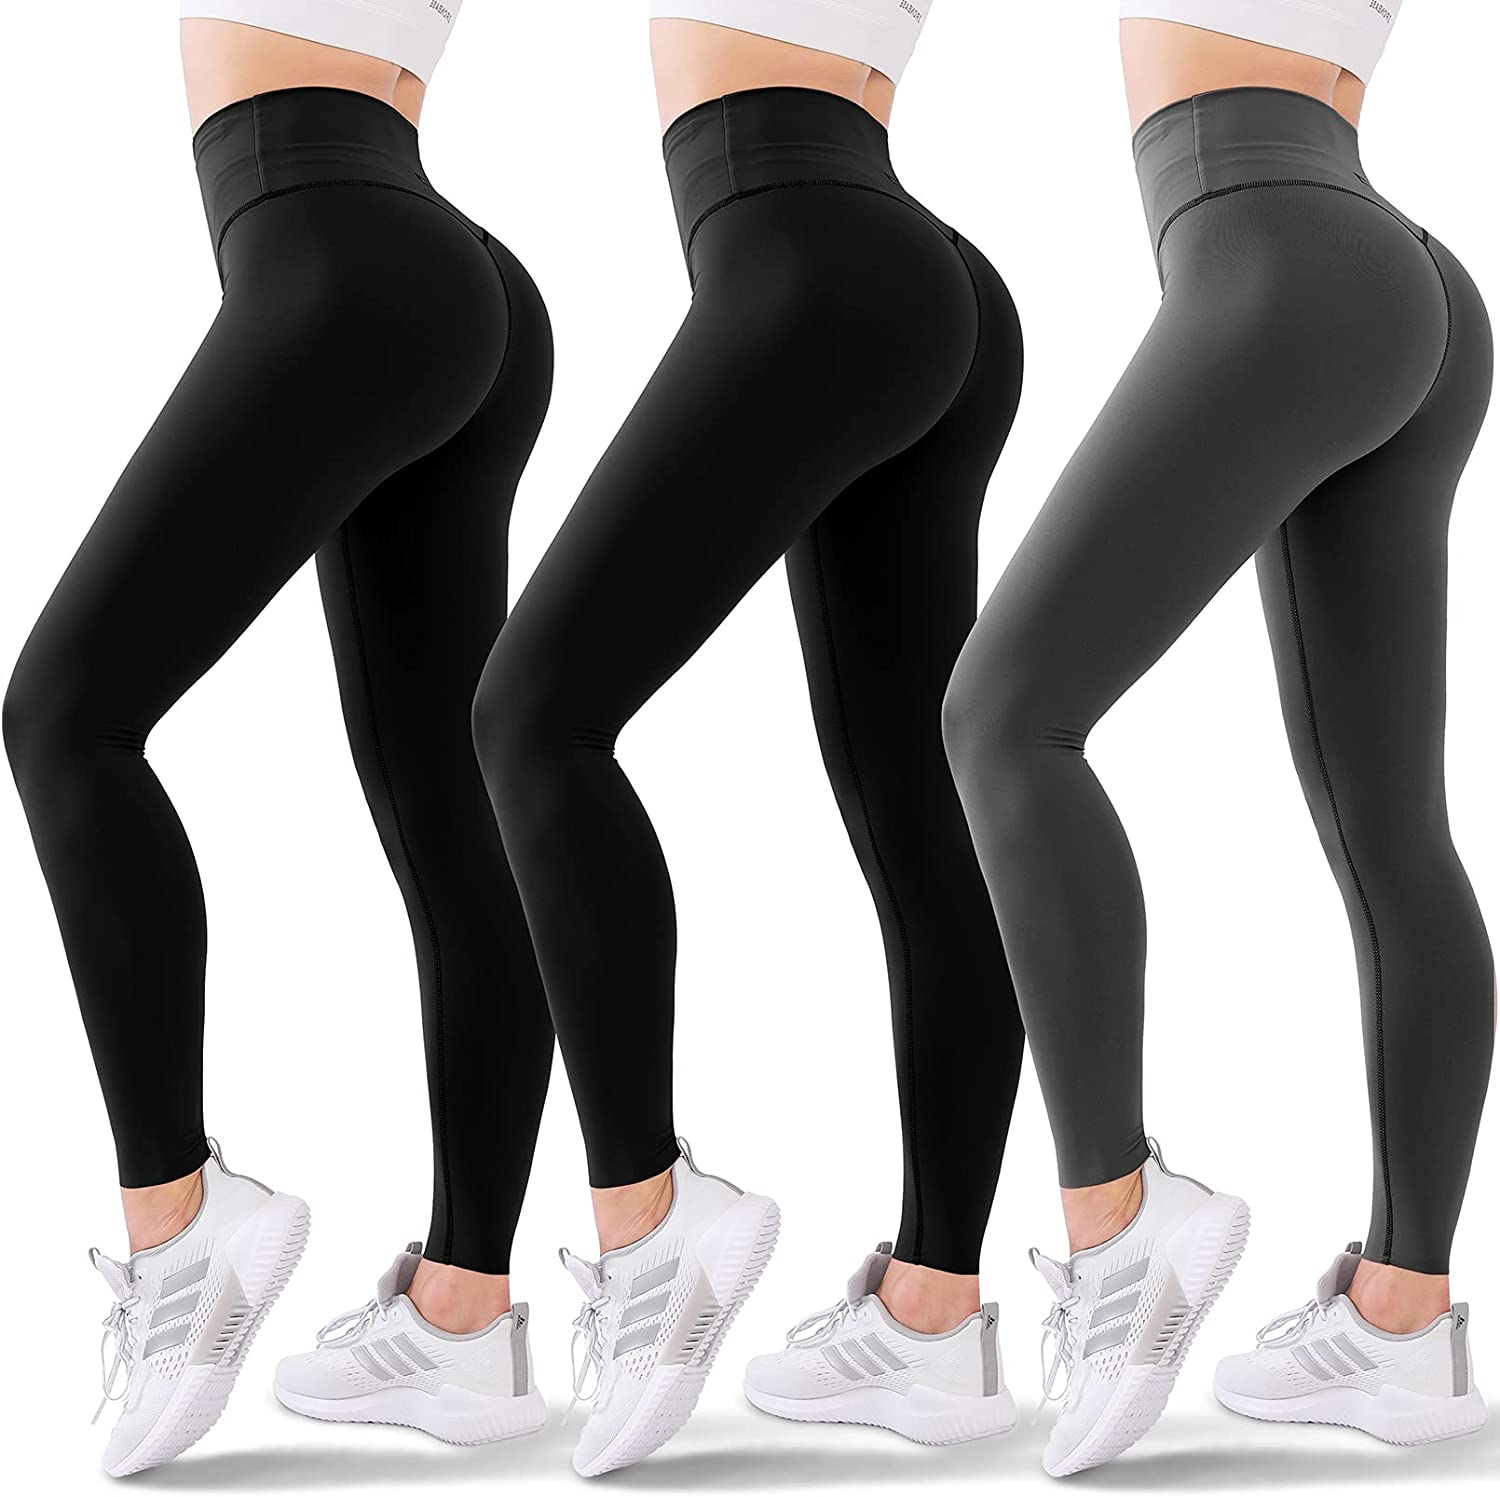 Buy High Waisted Leggings for Women - Soft Athletic Tummy Control